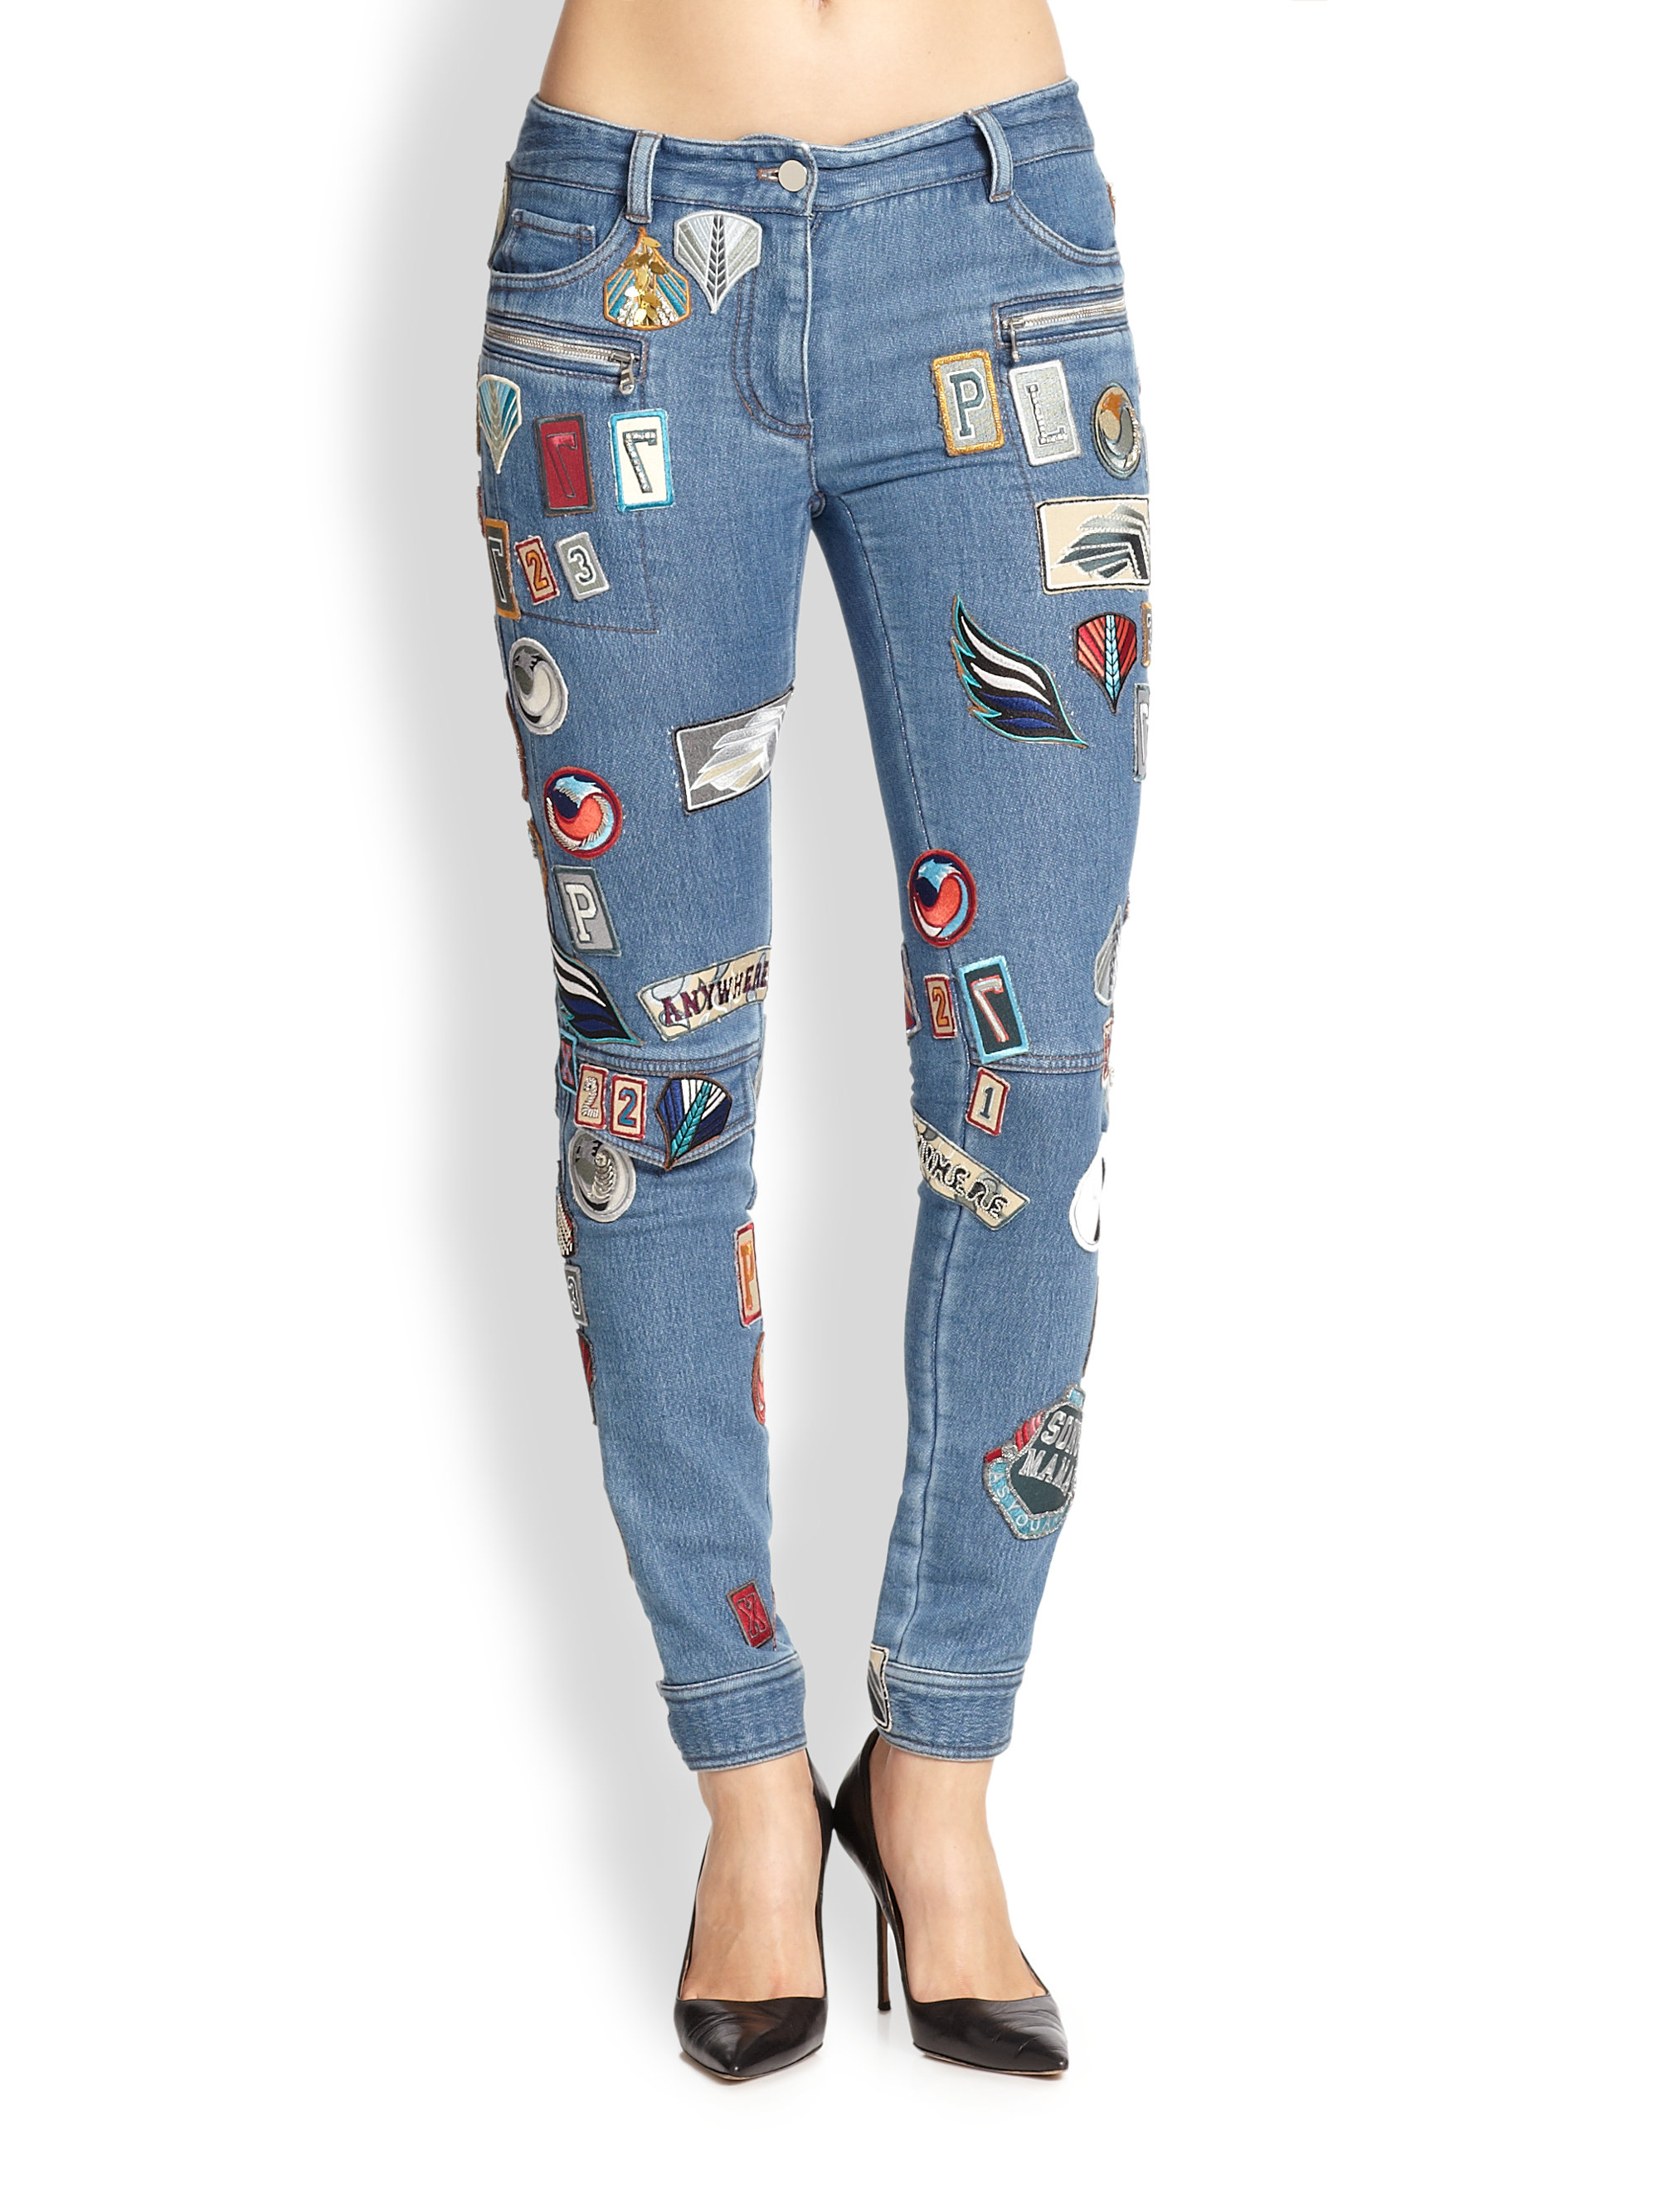 Lyst - 3.1 Phillip Lim Patched Skinny Jeans in Blue